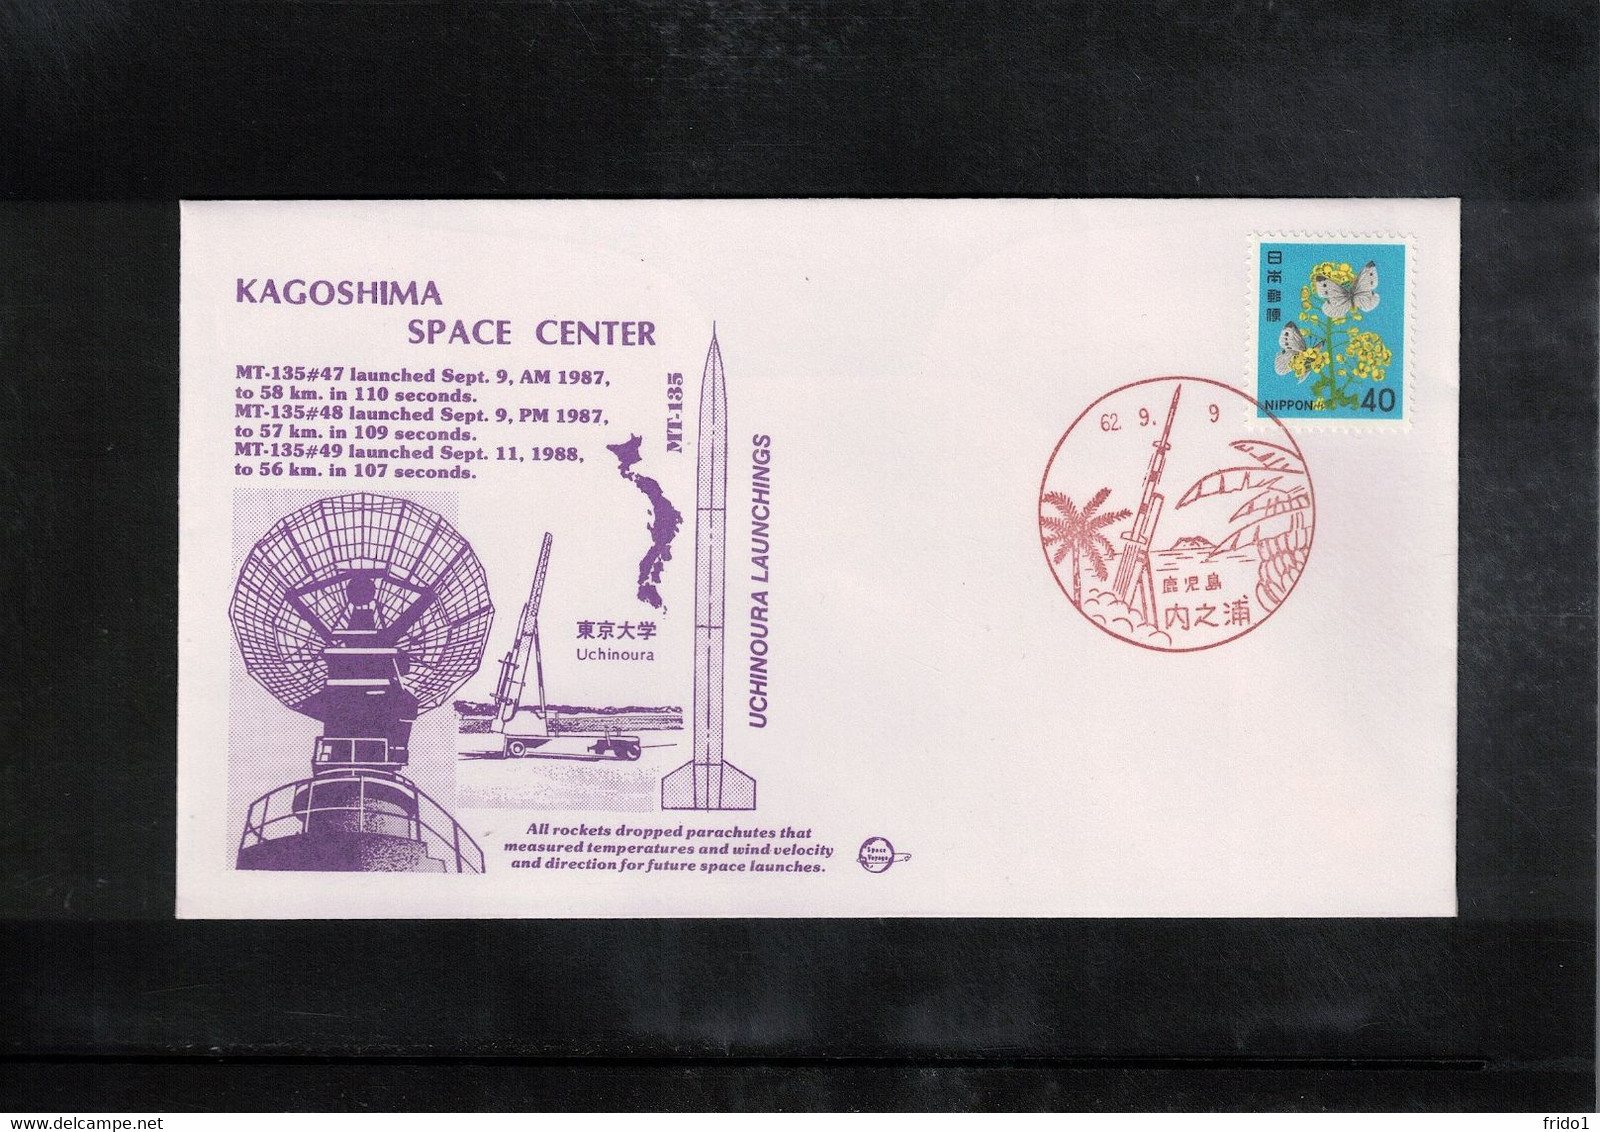 Japan 1987 Space / Raumfahrt Kagoshima Space Center - Launching Of Rockets MT-135#47,48,49 Interesting Cover - Asia